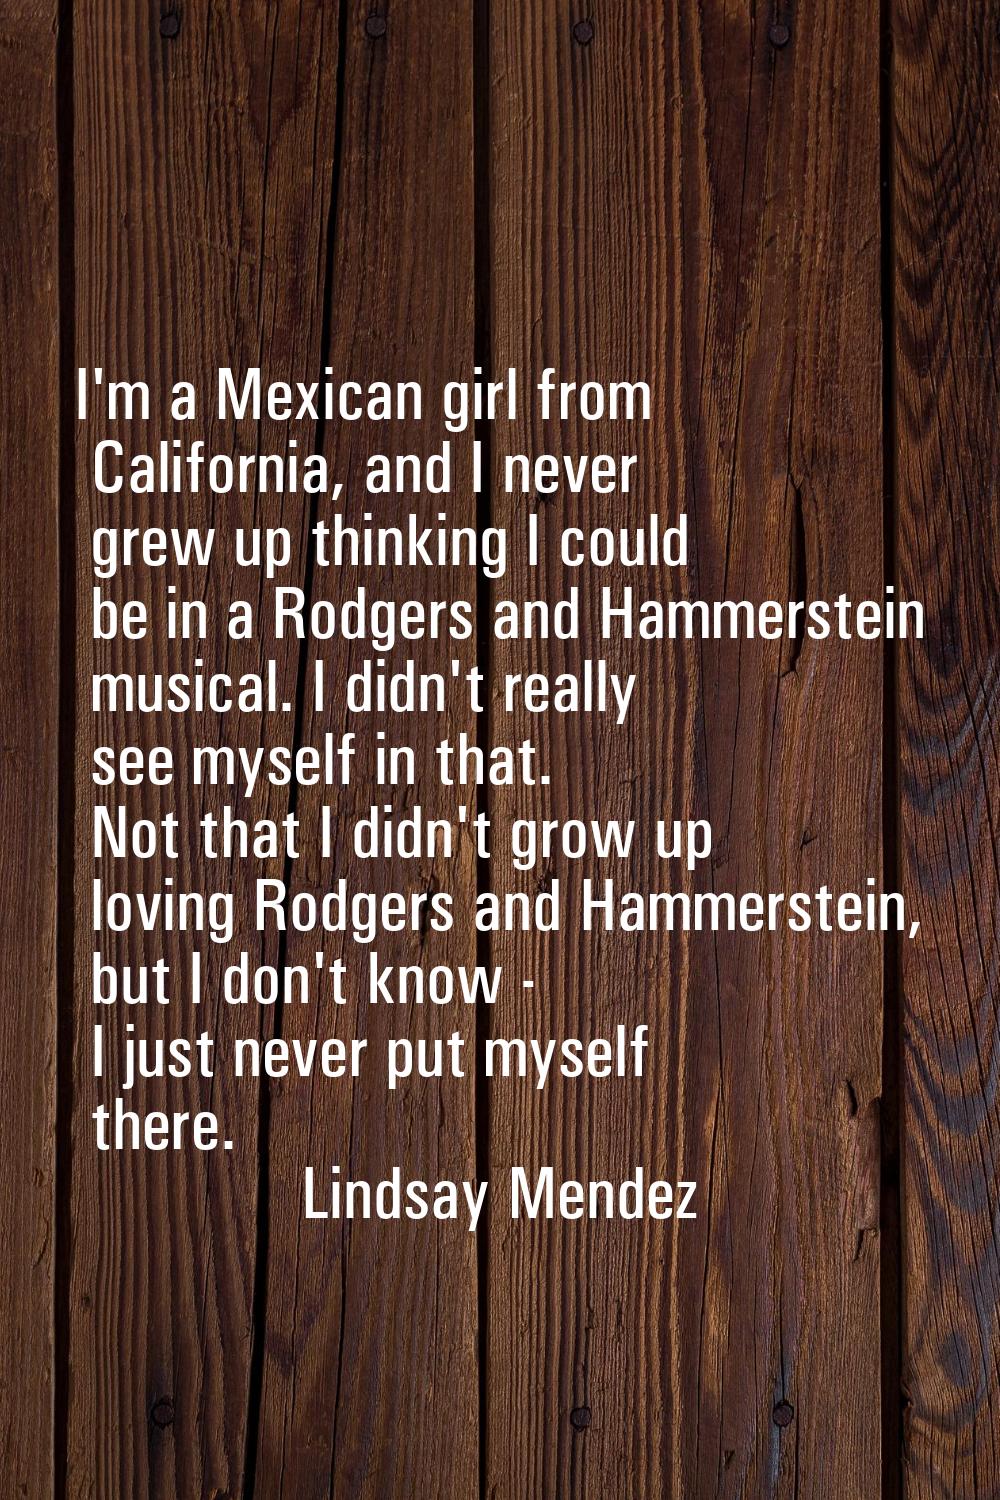 I'm a Mexican girl from California, and I never grew up thinking I could be in a Rodgers and Hammer